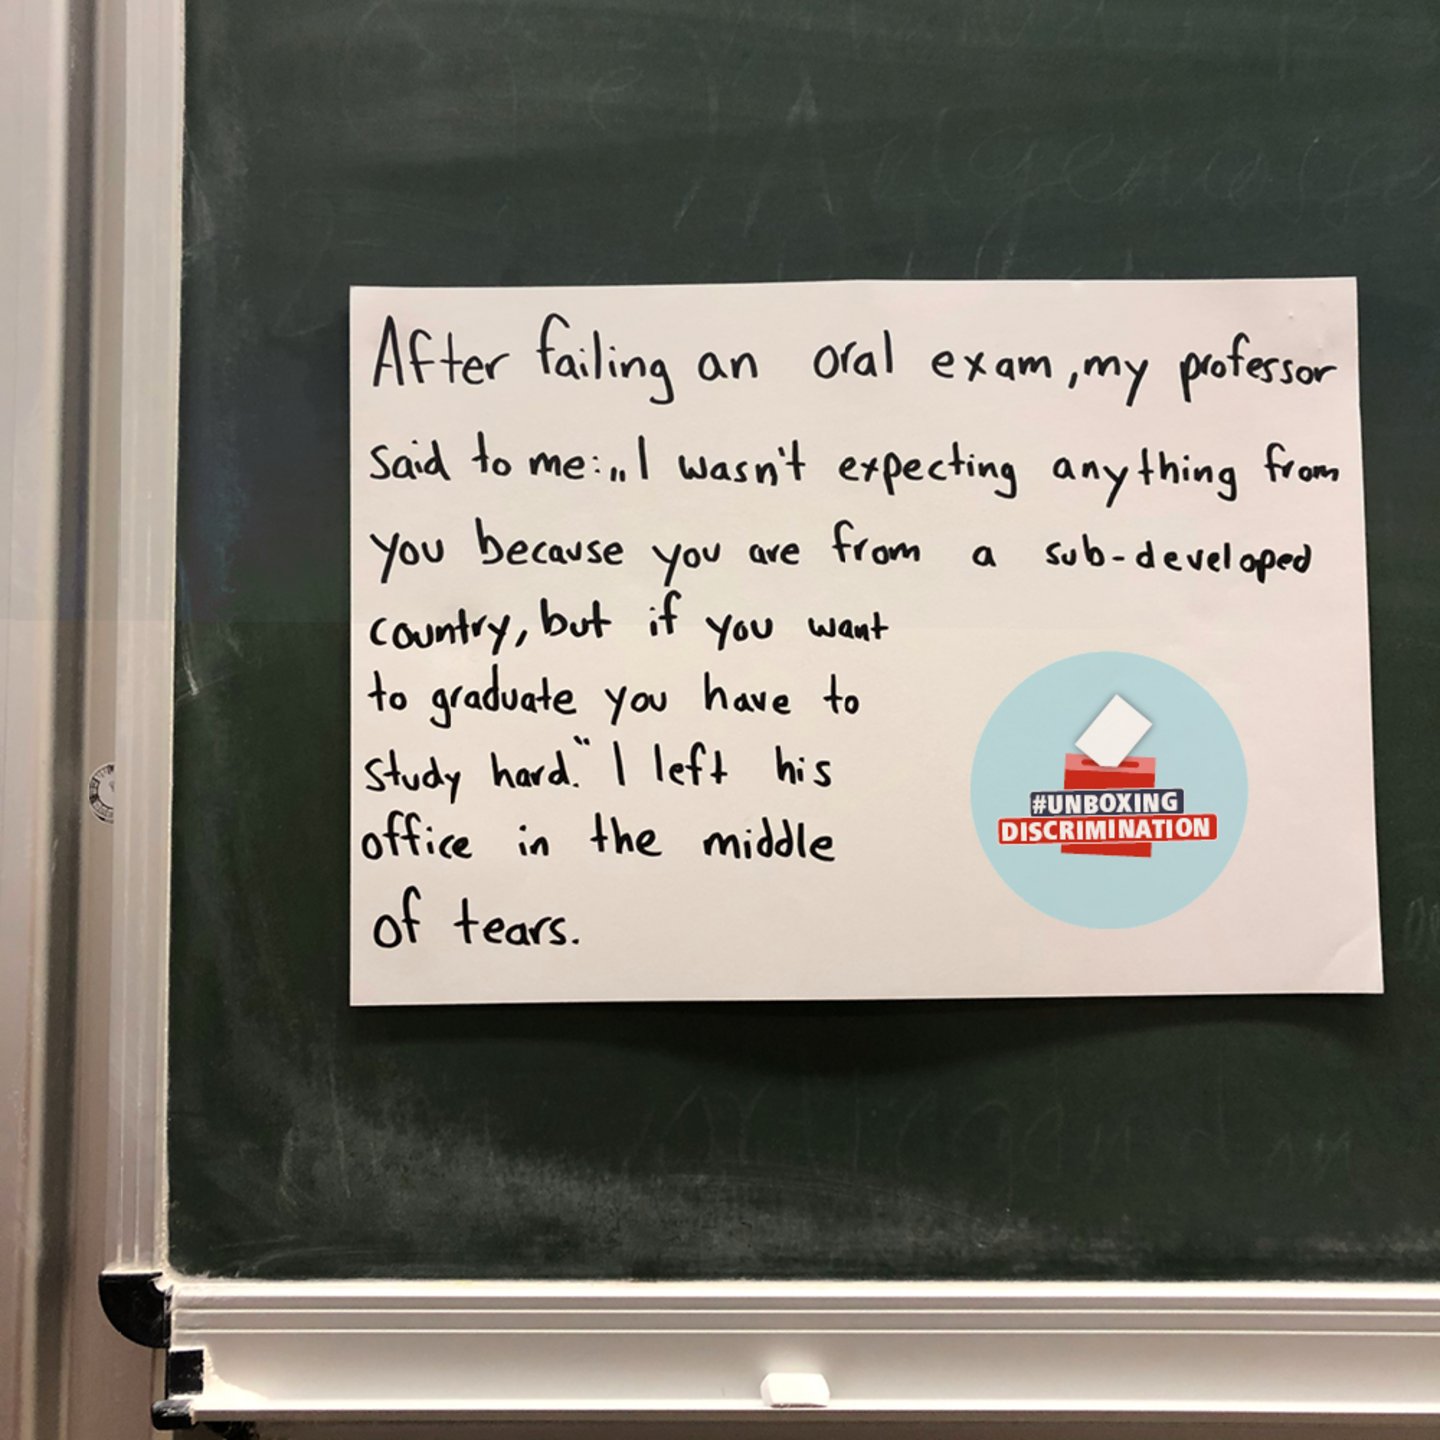 A white poster hangs on a chalkboard. Next to the logo of the campaign #unboxingdiscrimination is handwritten: "After failing an oral exam the professor said to me “ I was not expecting anything from you because you are from an sub-developed country, but if you want to graduate you have to study hard” I left his office in the middle of tears."